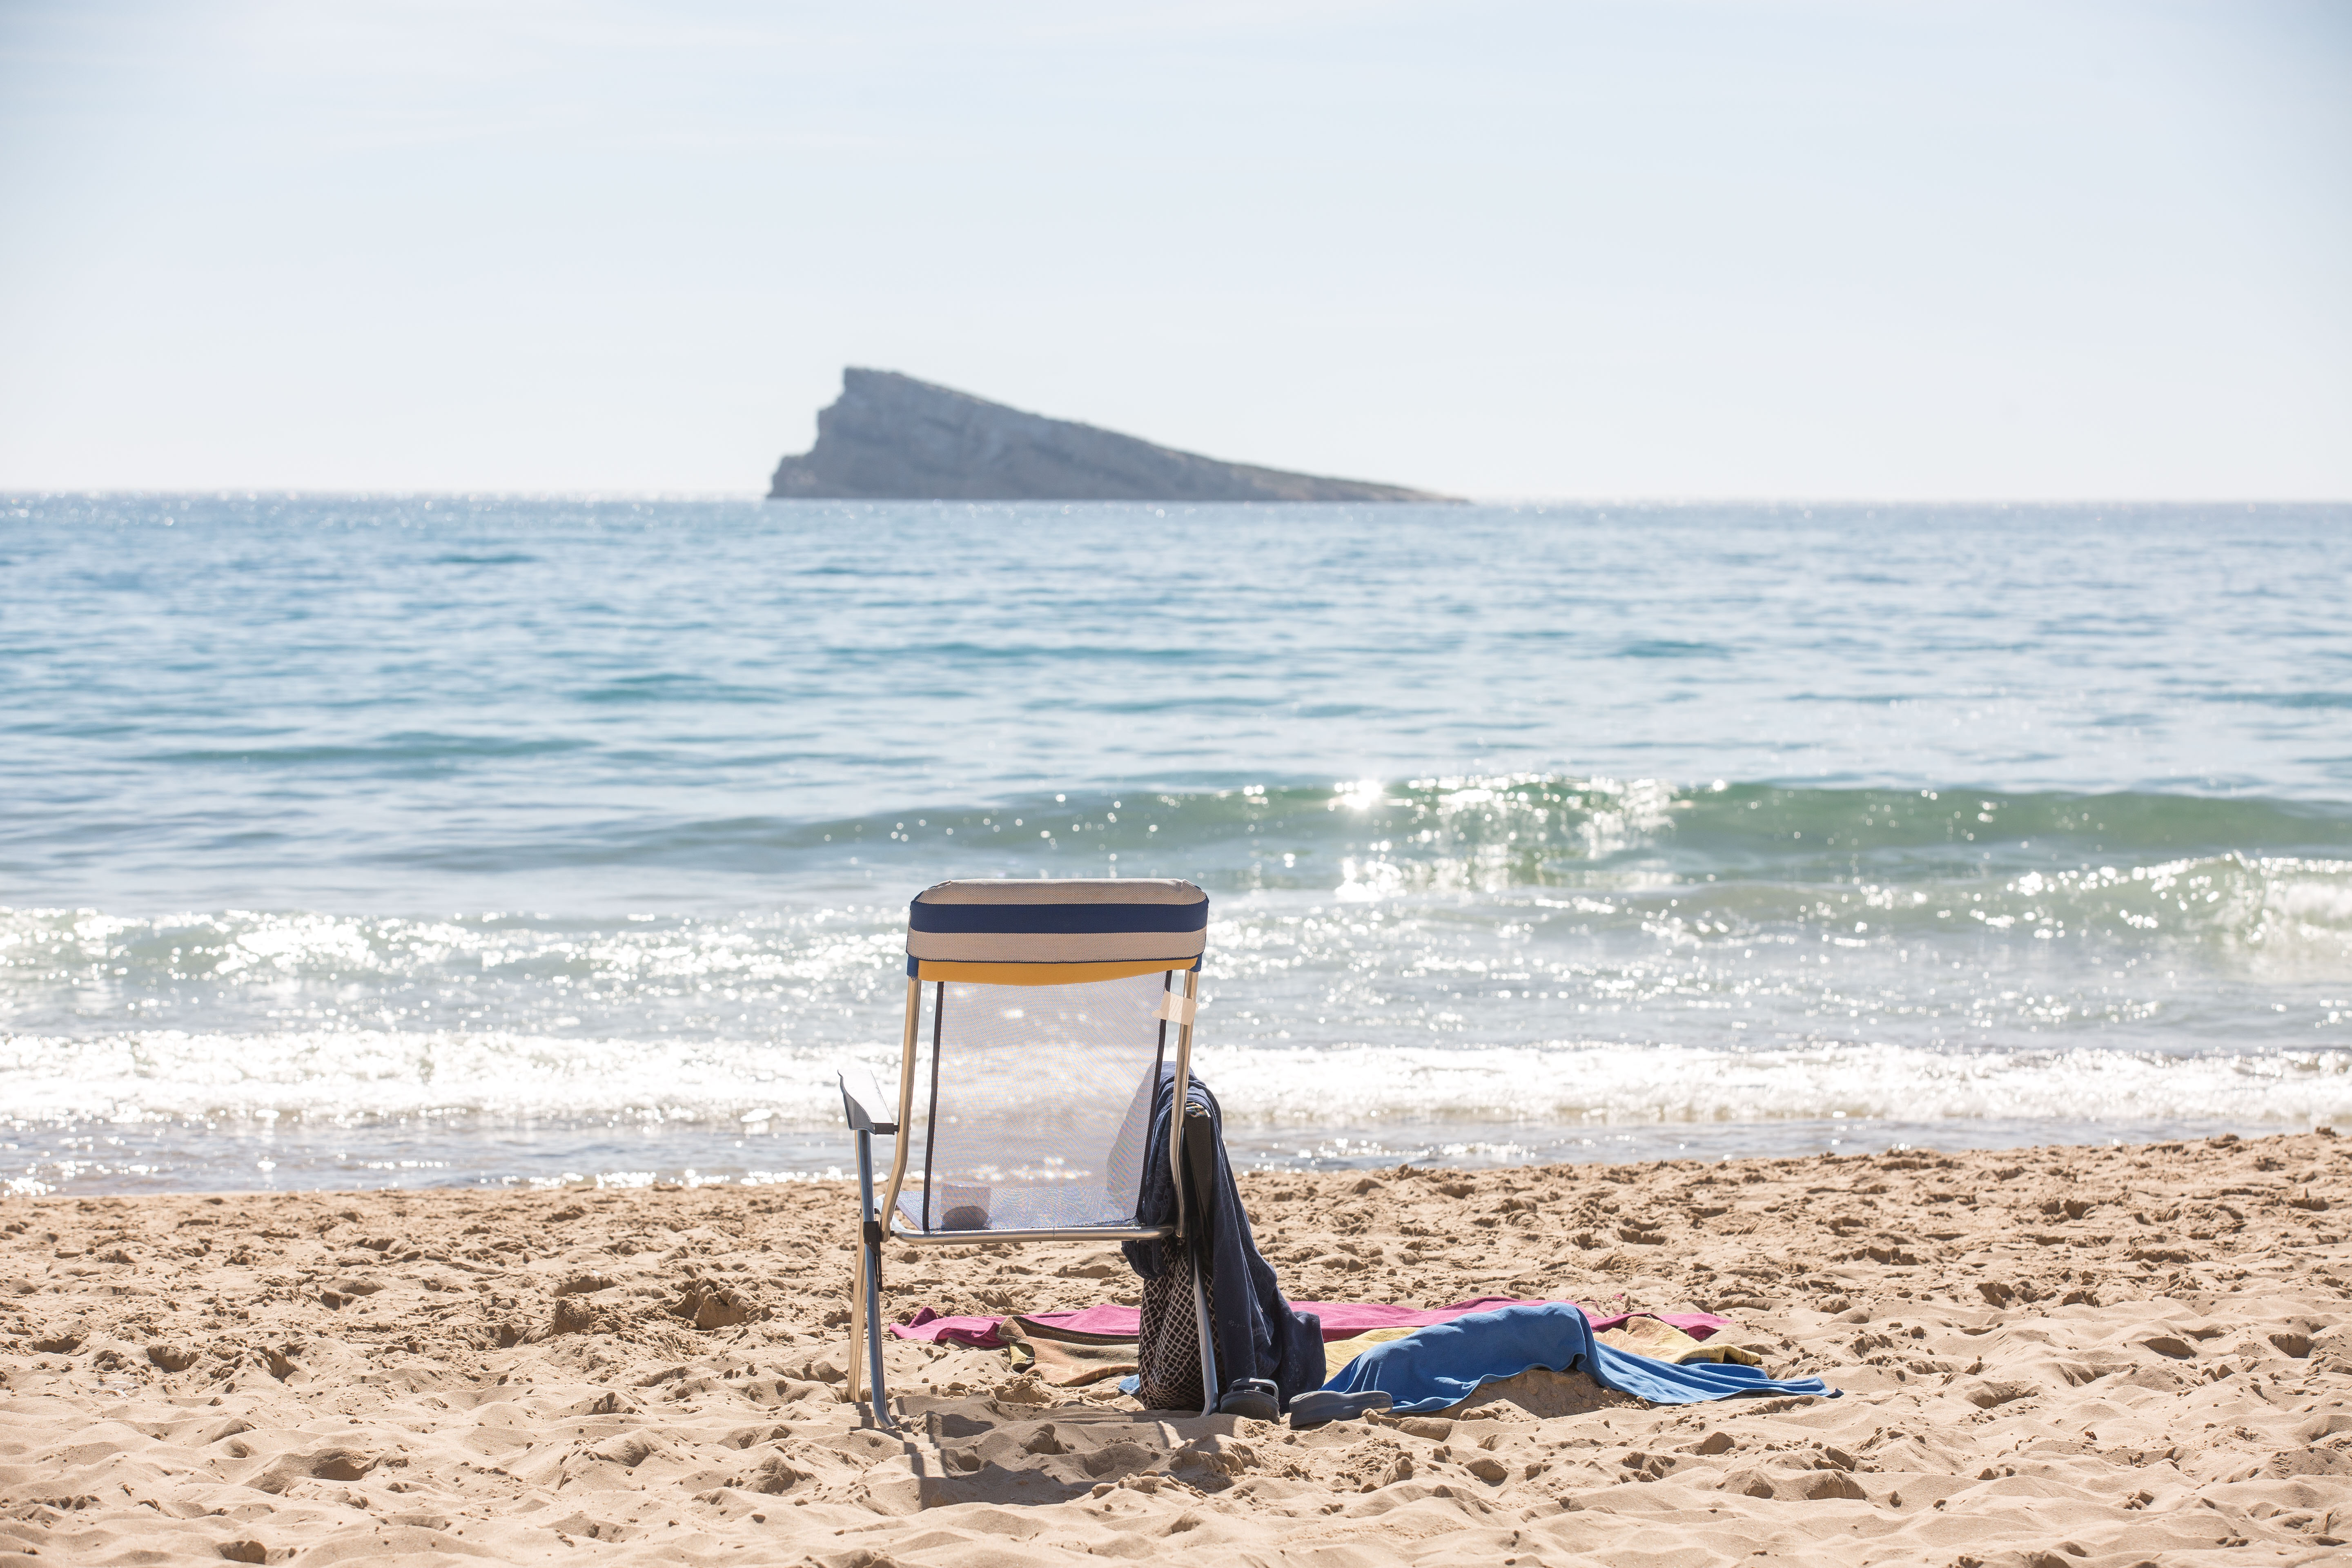 Bathers Visit The Beaches Of Benidorm After The Rise In Temperatures .